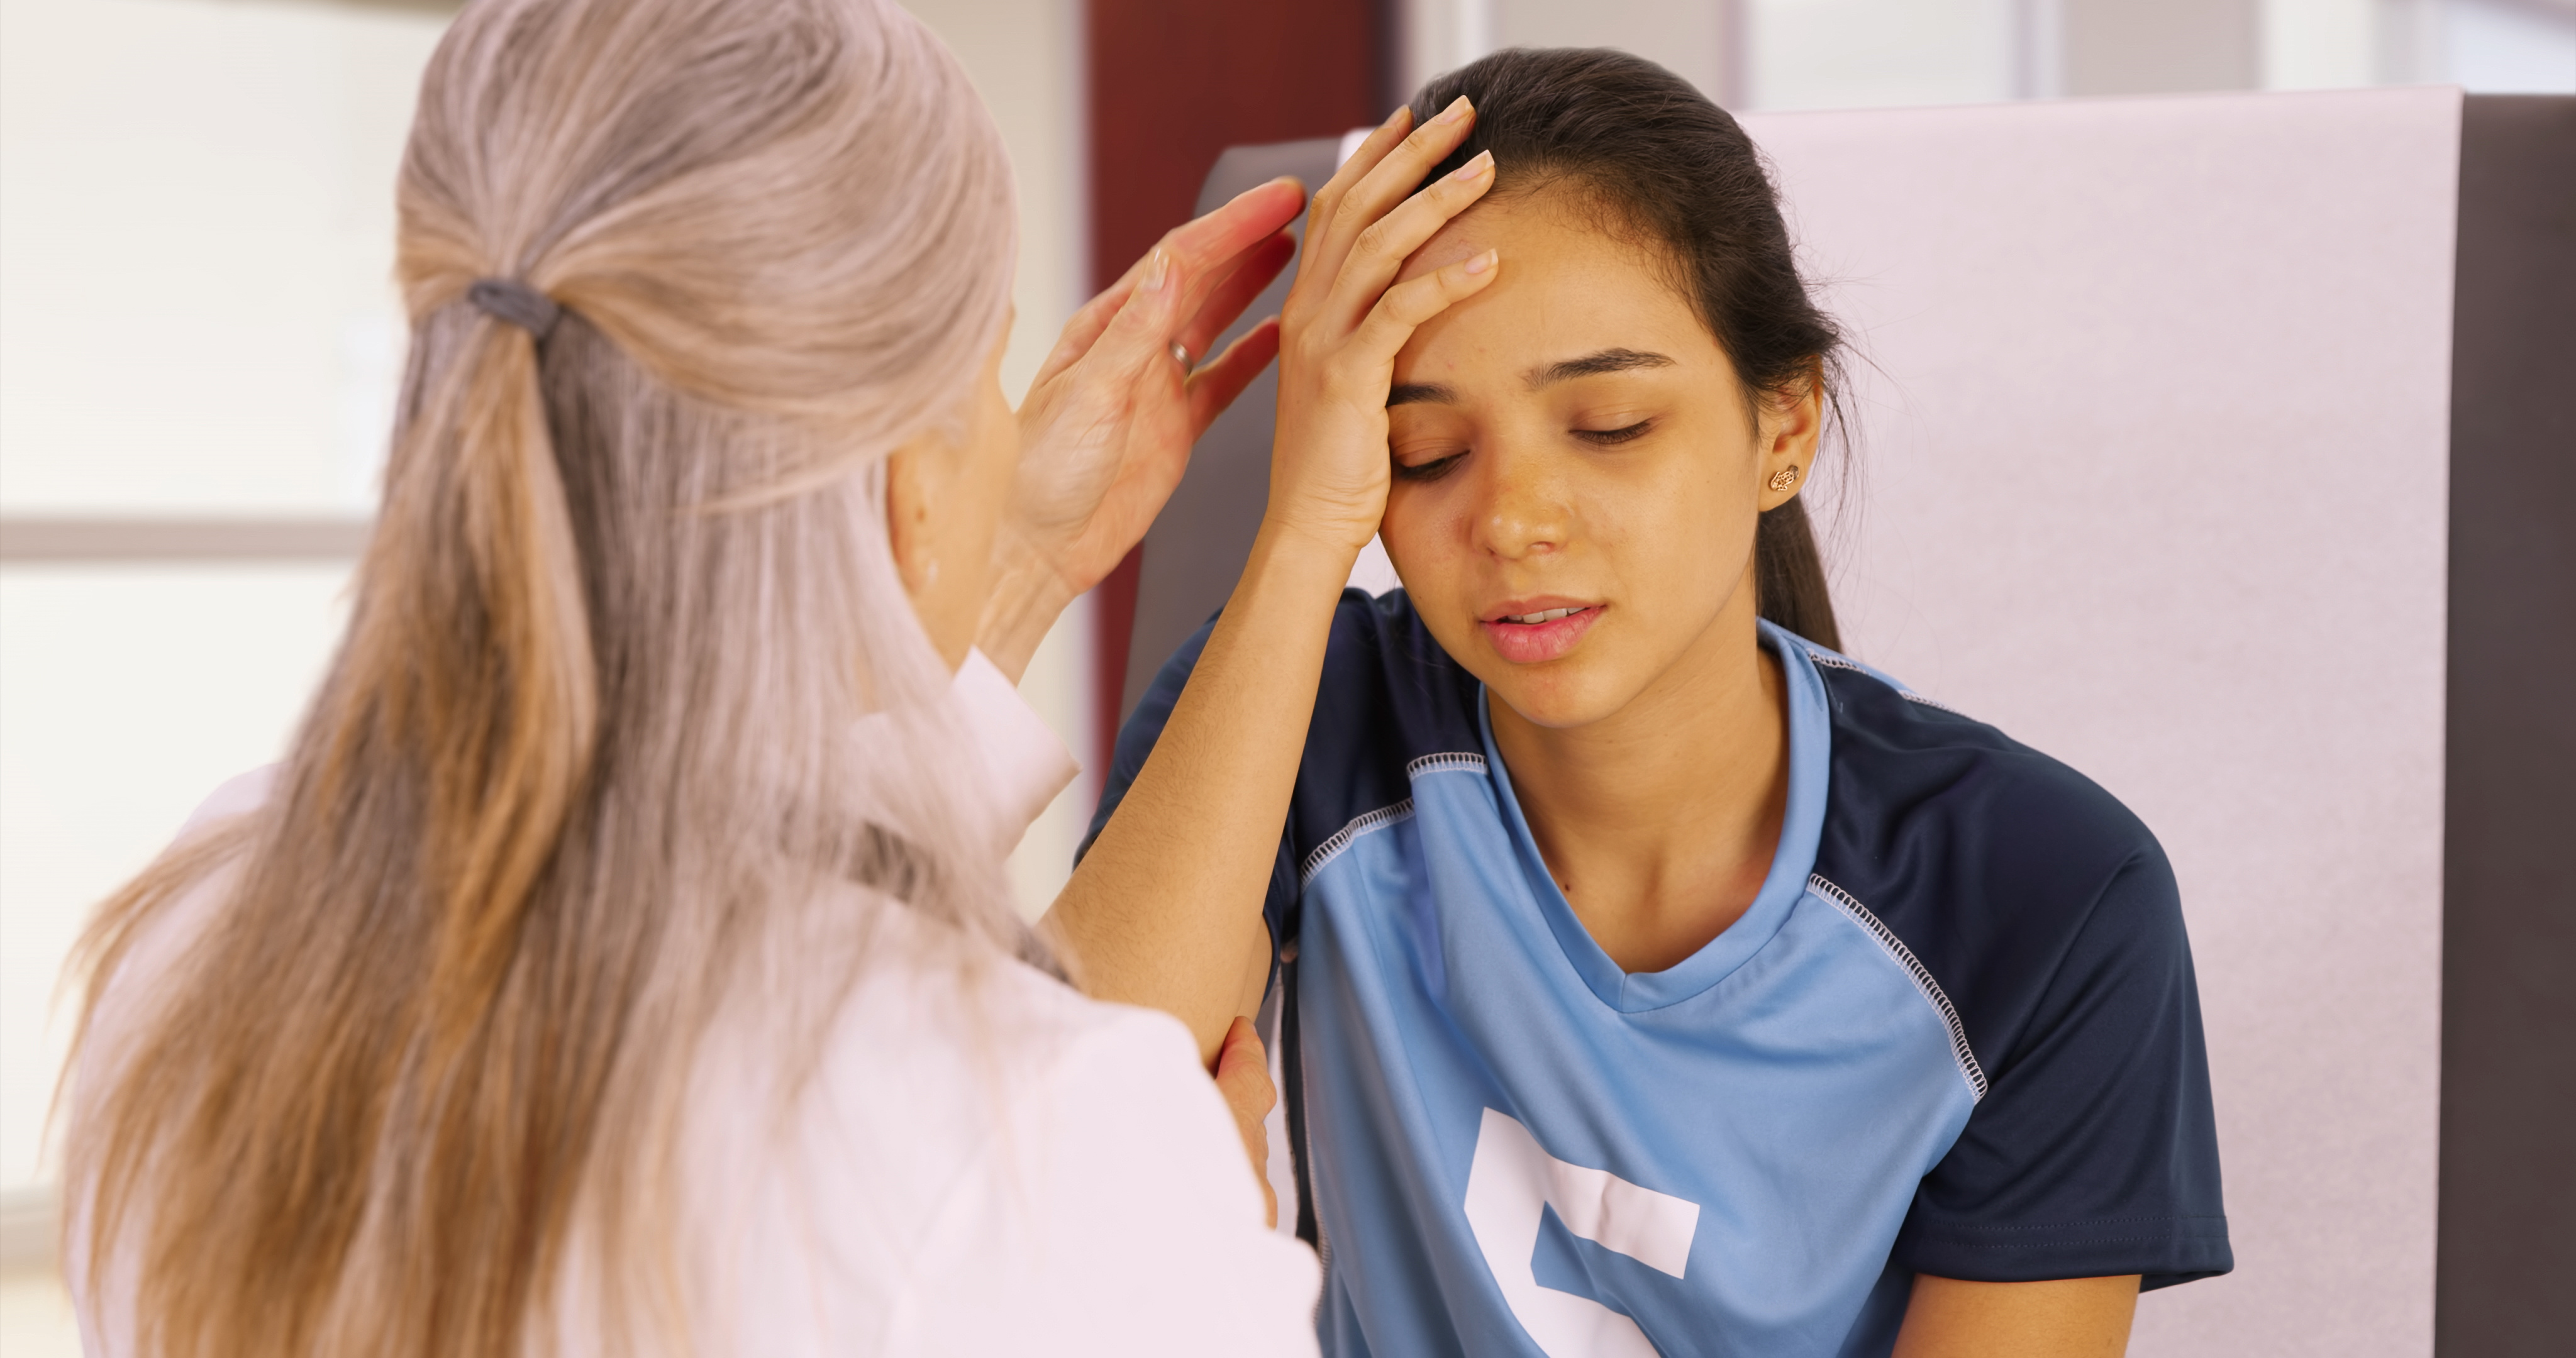 physiotherapy for concussion recovery